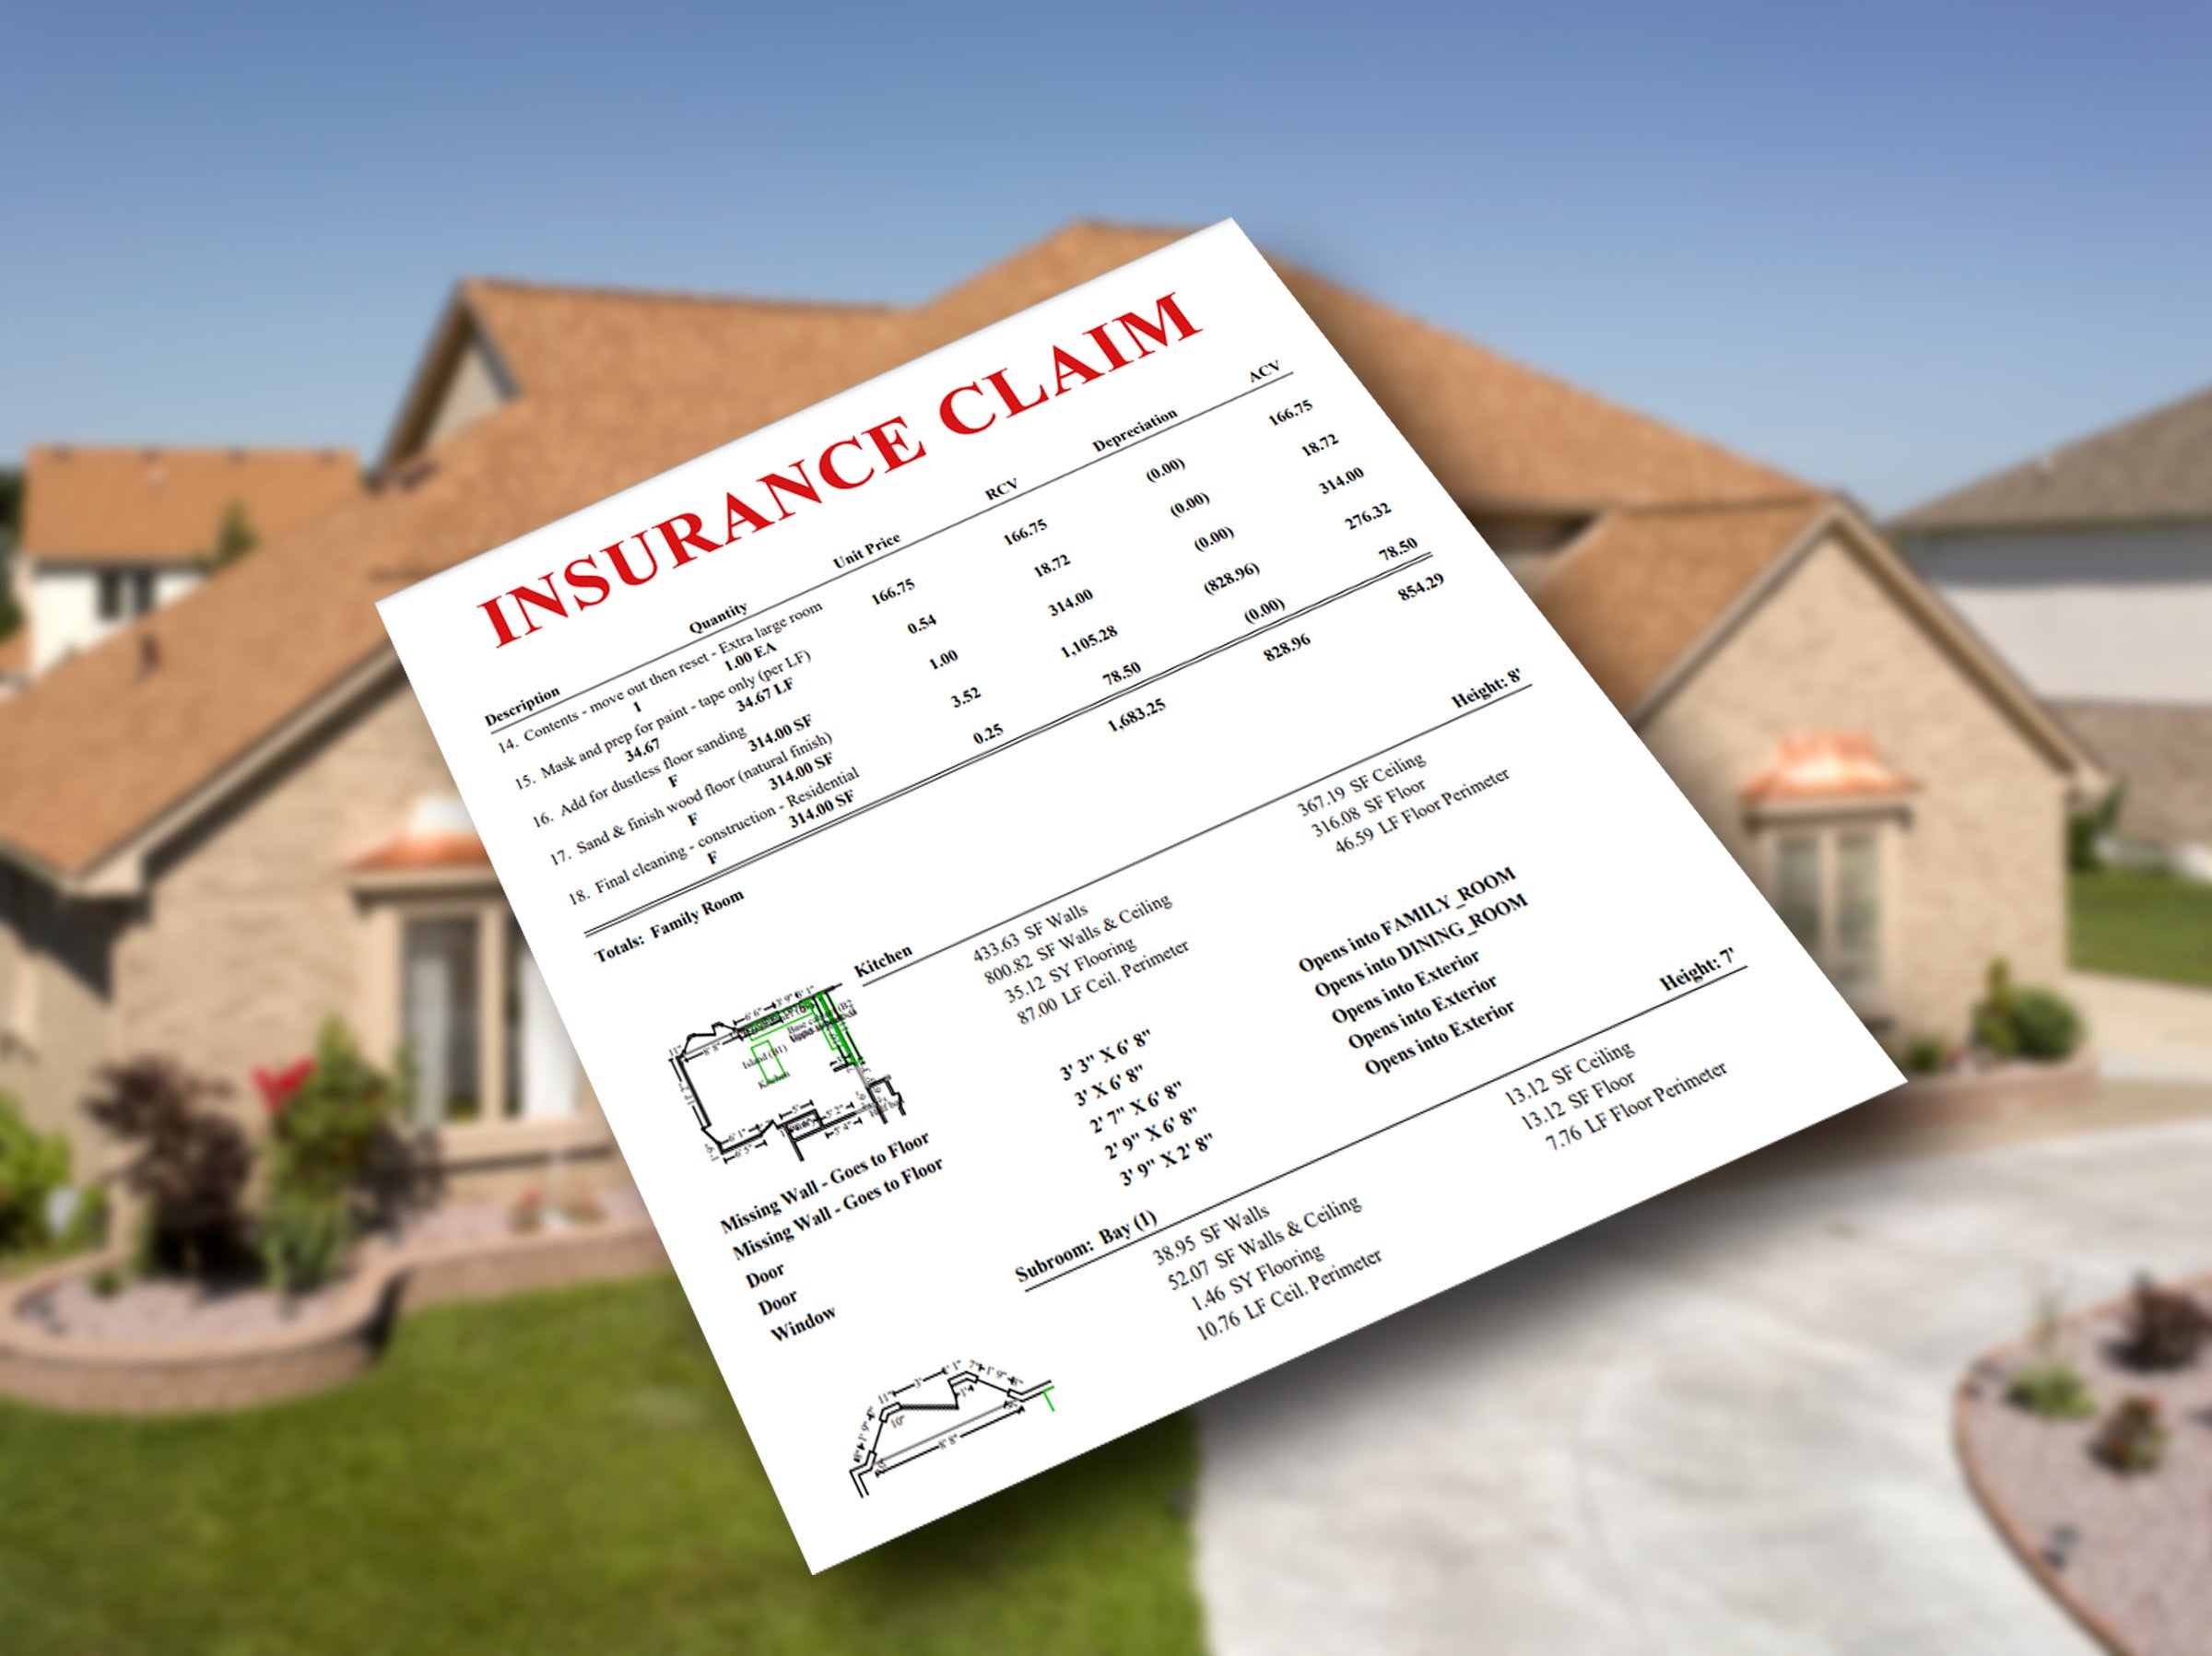 How to file an insurance claim for your roof